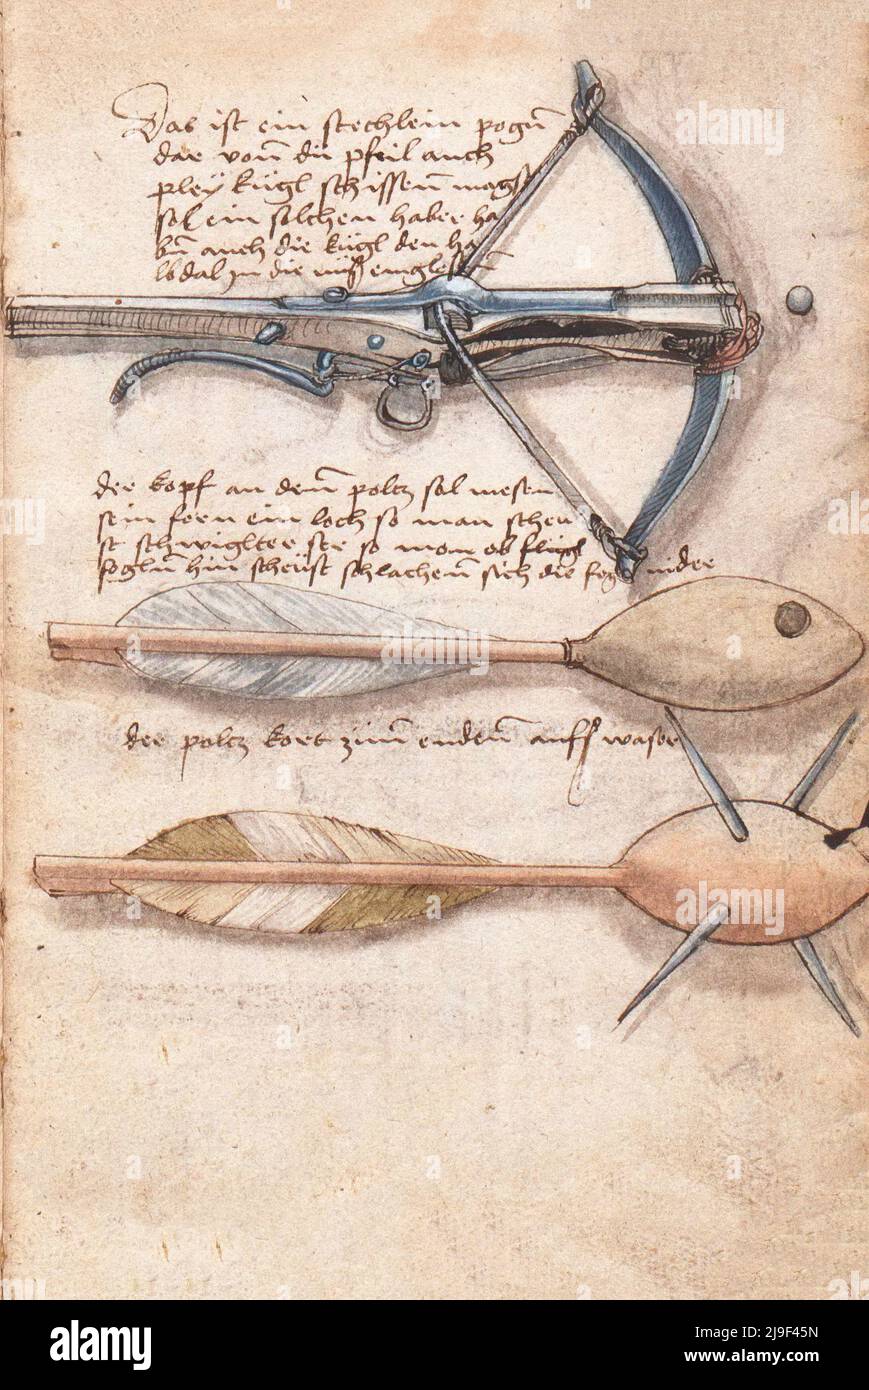 Medieval illustration of crossbow and different types of crossbow arrows. The tools of Martin Löffelholz (1505) Löffelholtz Codex. Illustrations and d Stock Photo